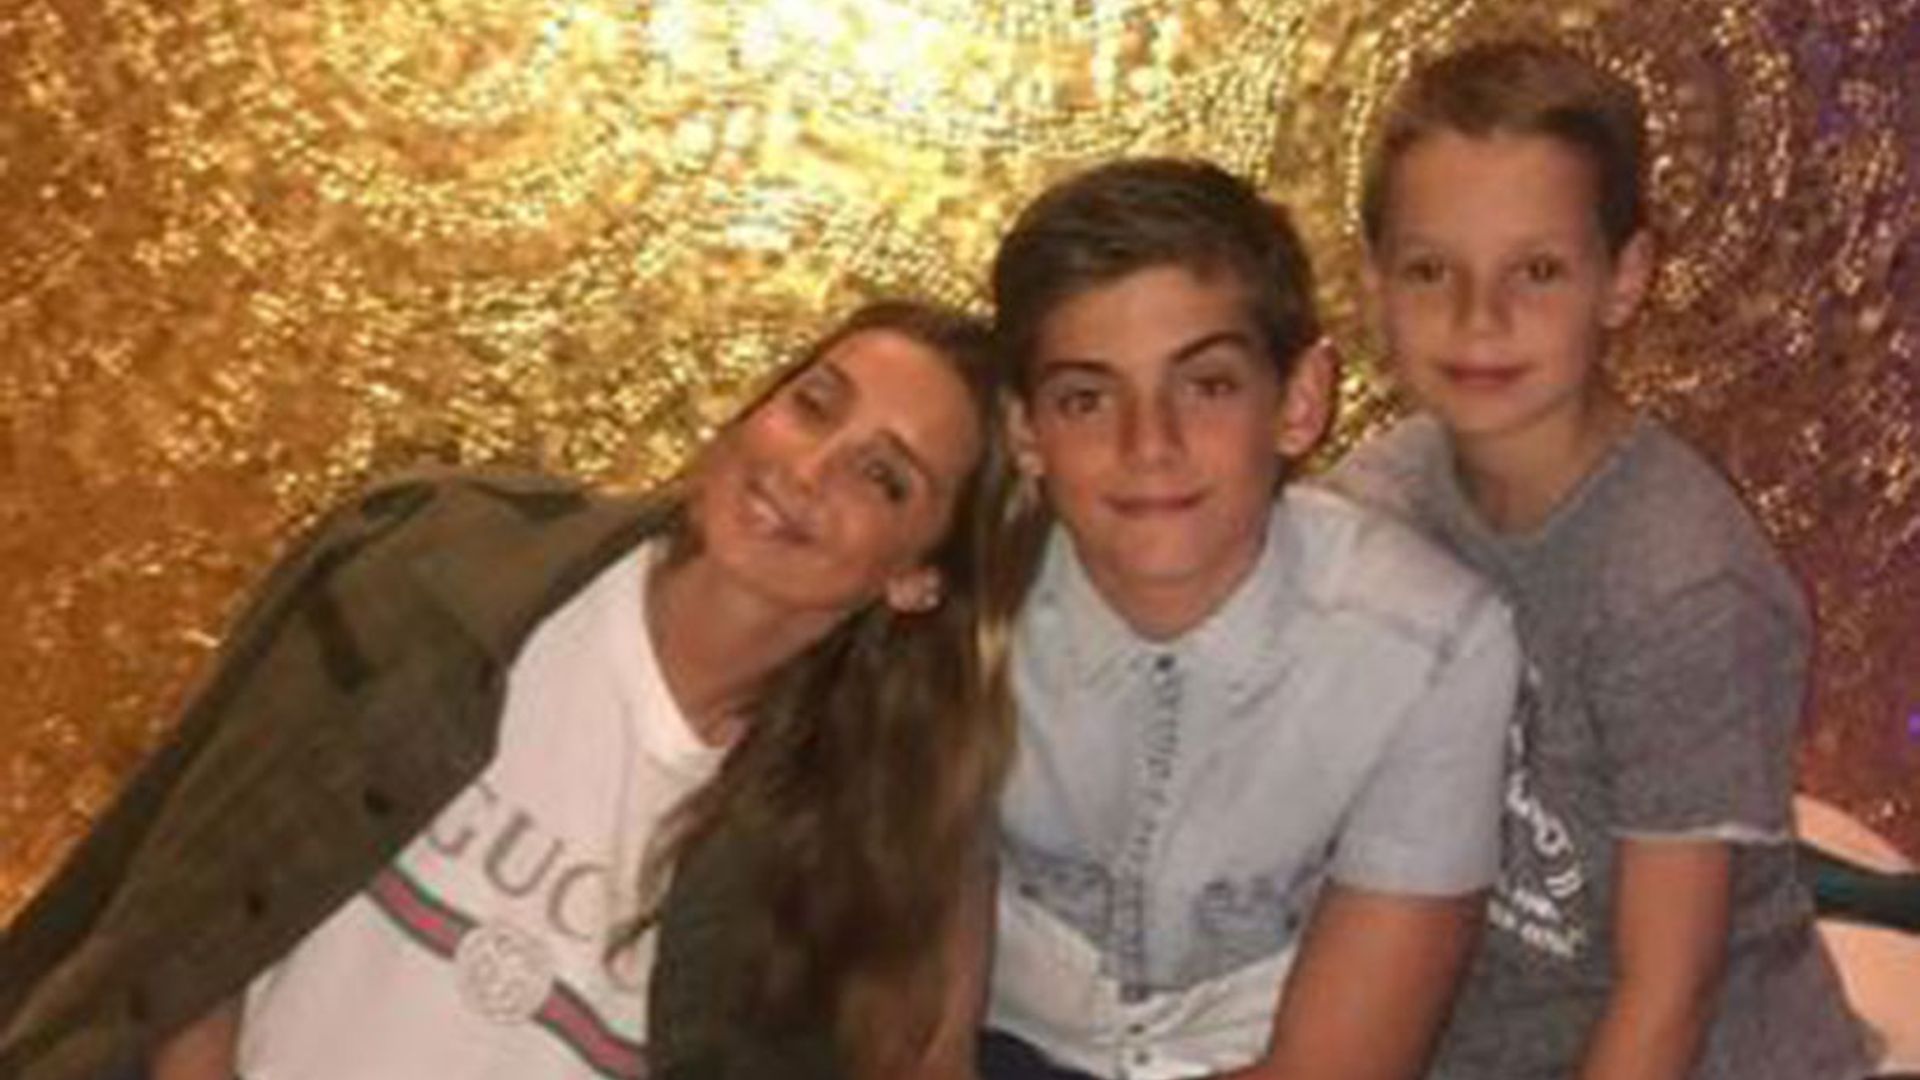 Louise Redknapp opens up about being a working mother: 'It's good my sons see me being ambitious'